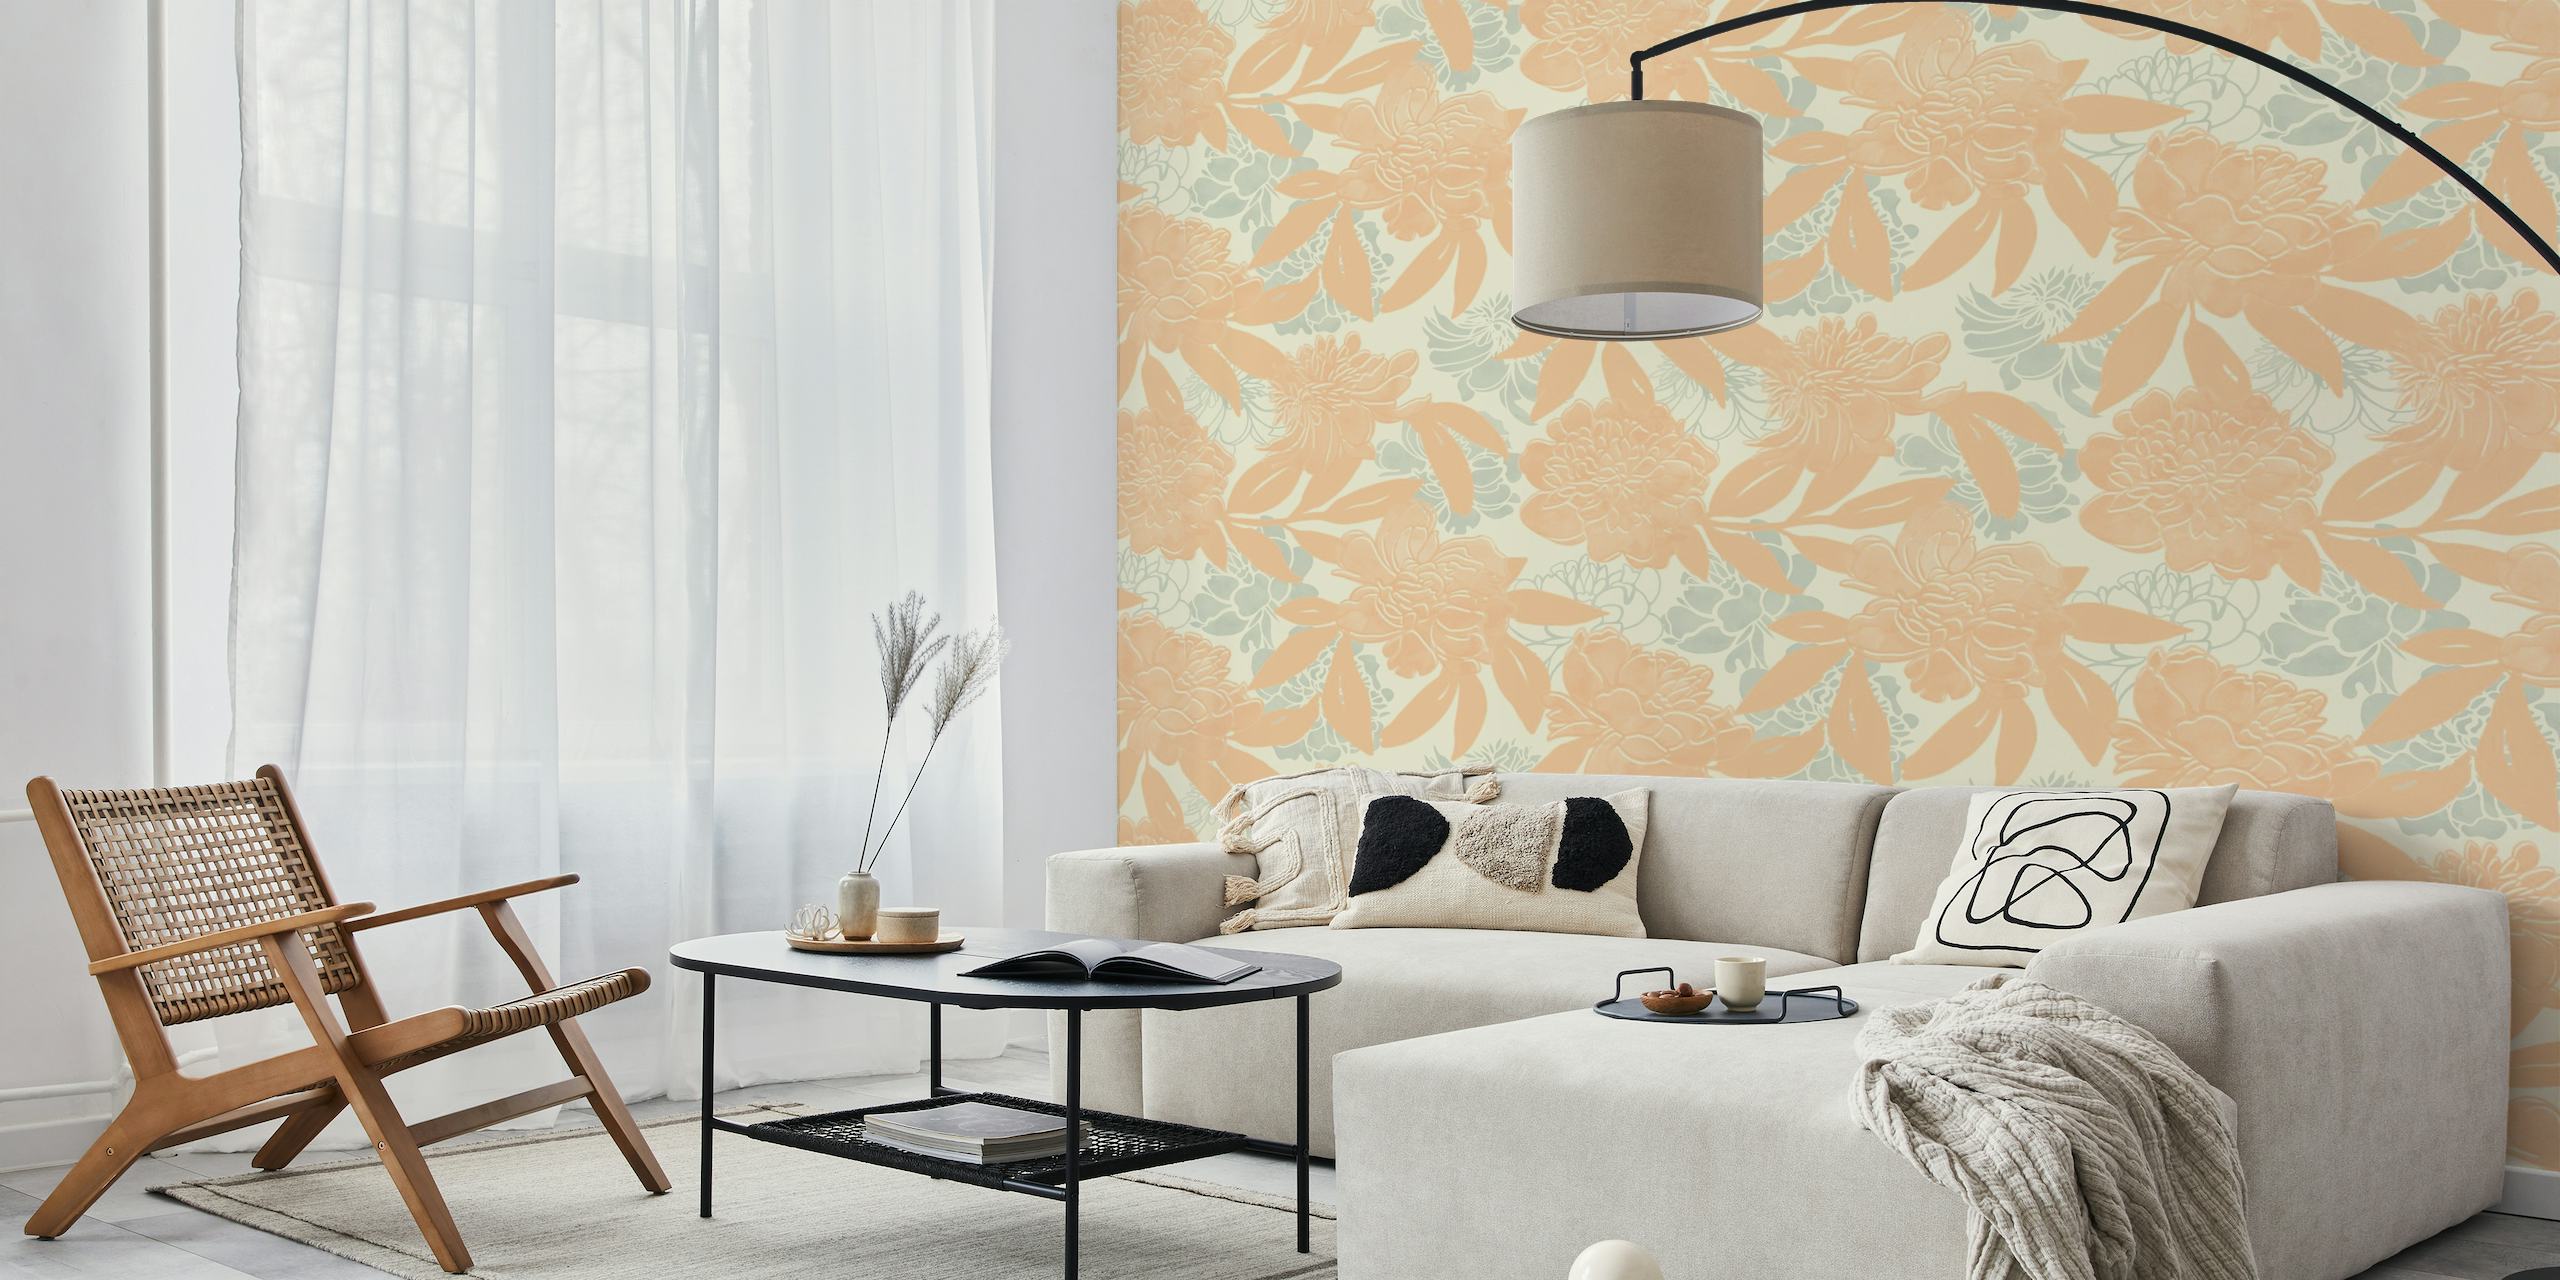 Pastel-toned stylized floral patterns wall mural